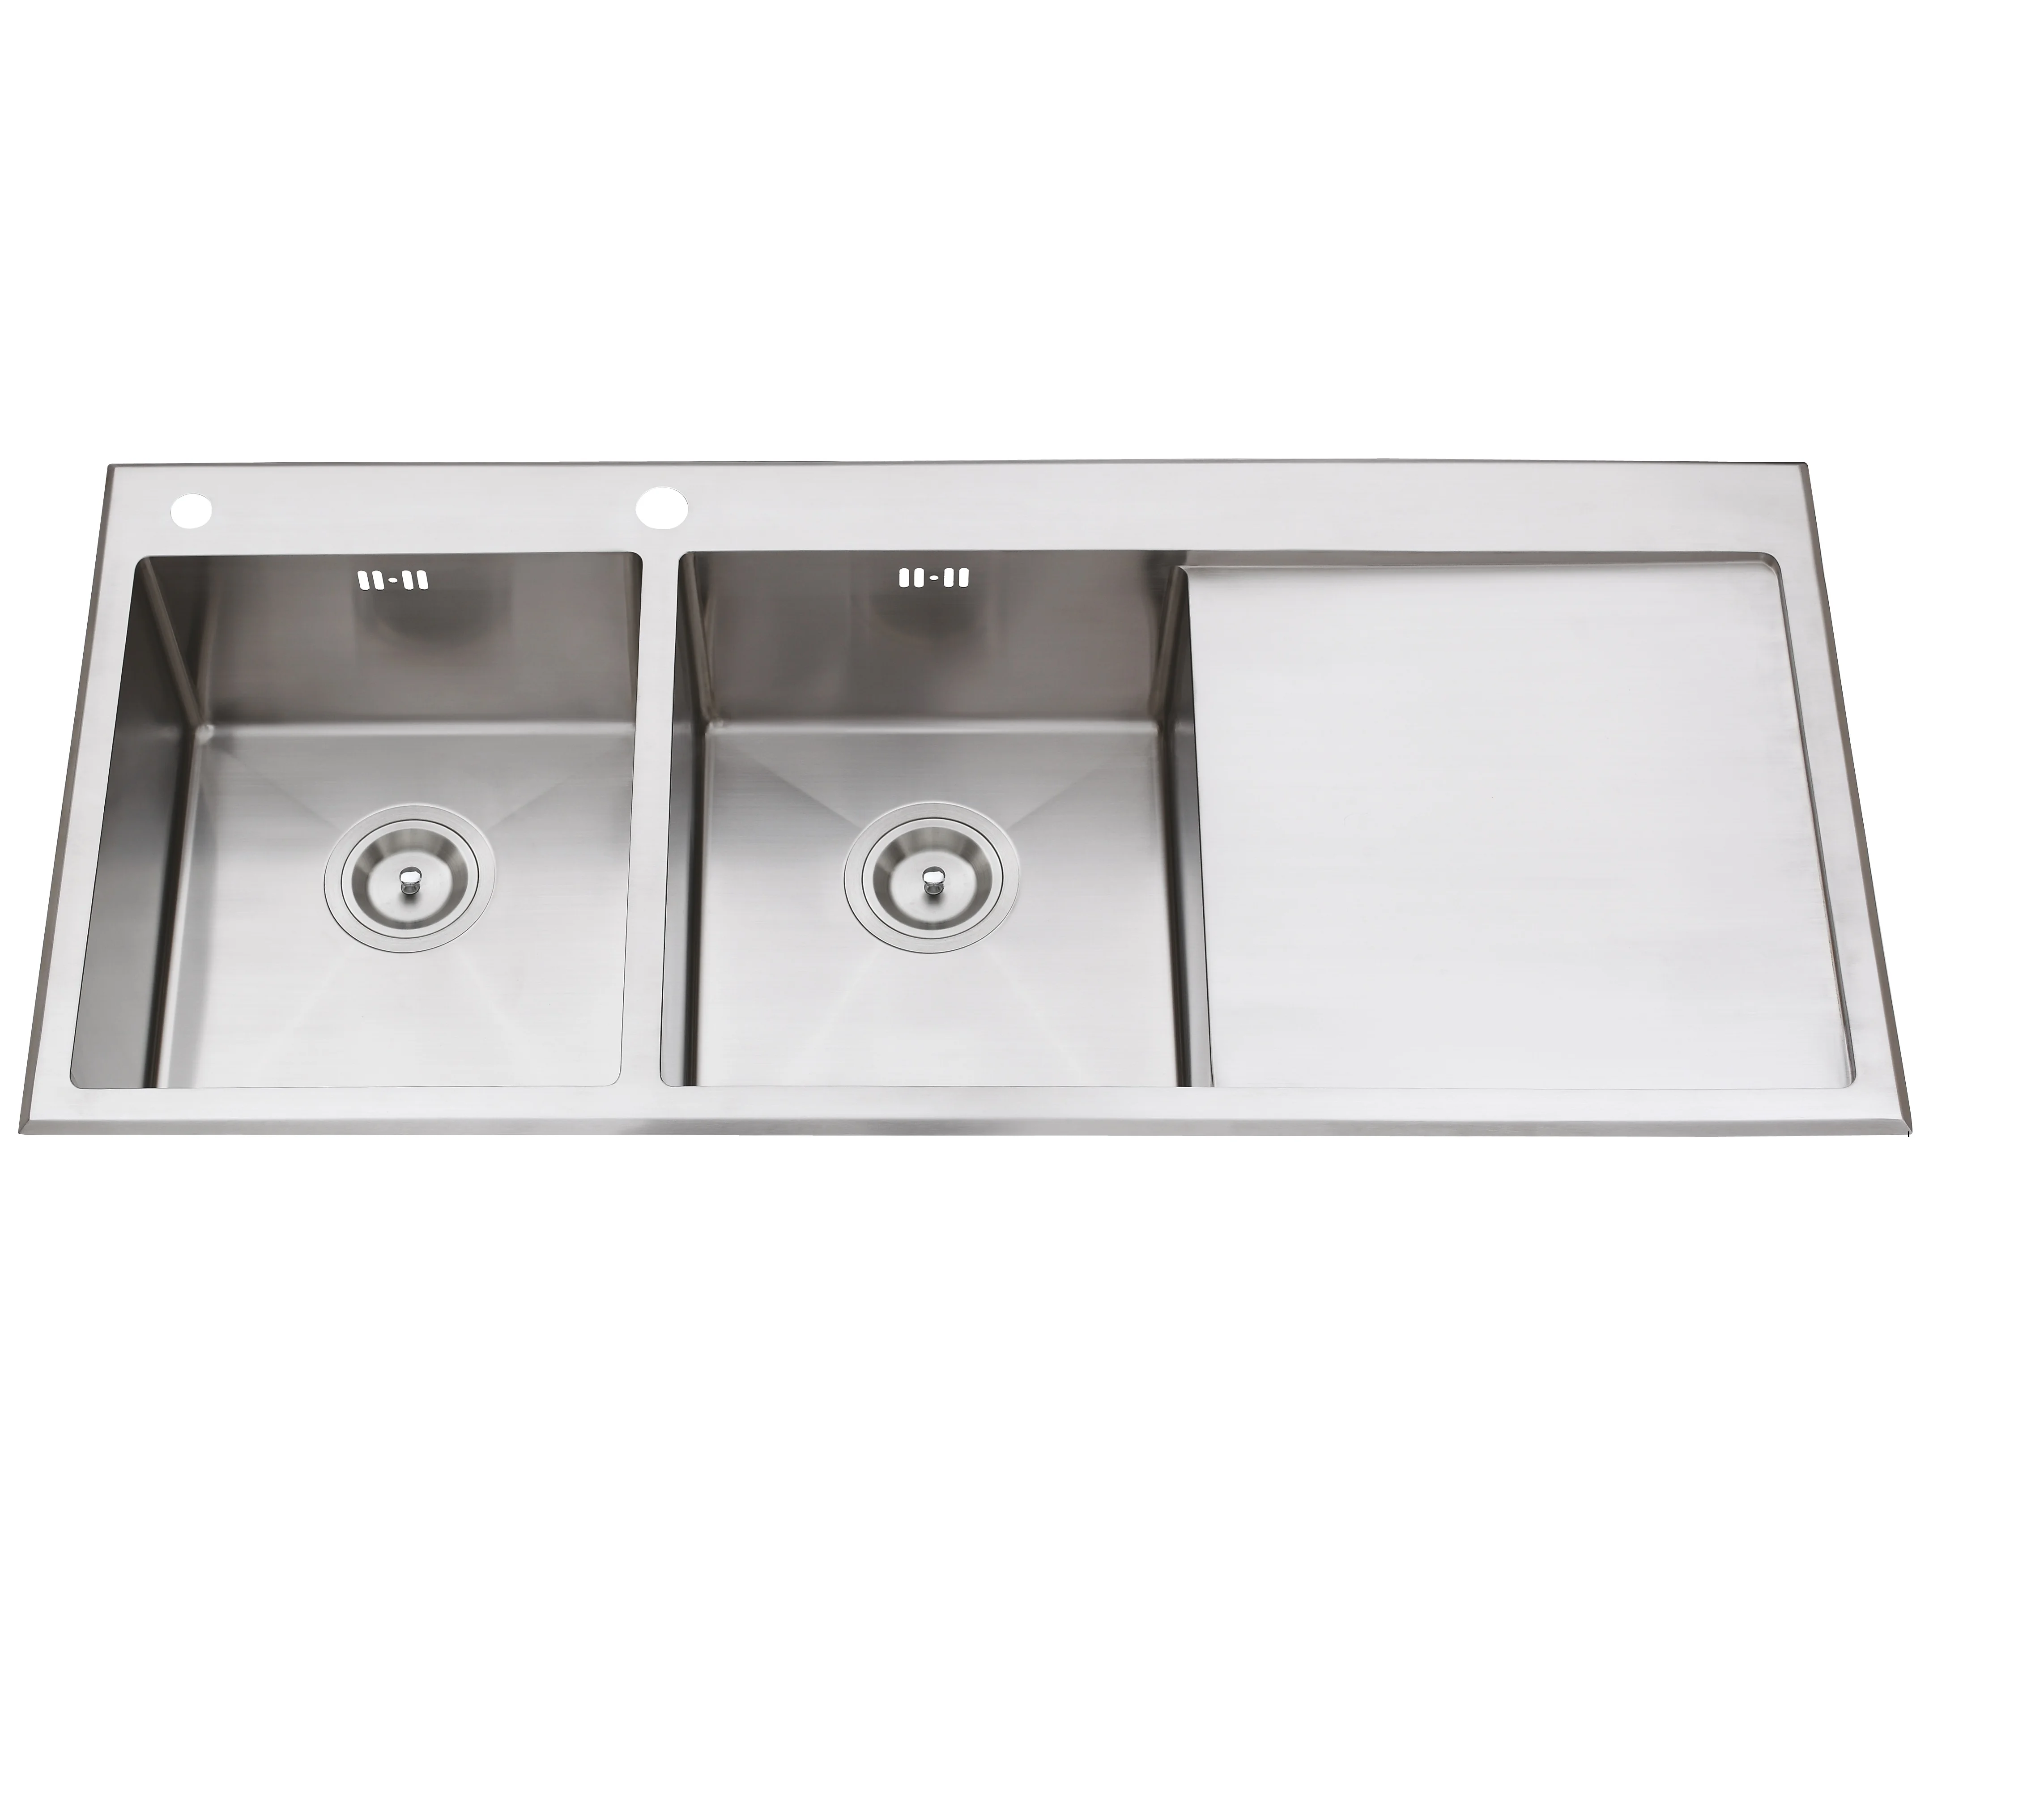 Stainless Steel Kitchen Double Drainboard Sink With Drain Board ...